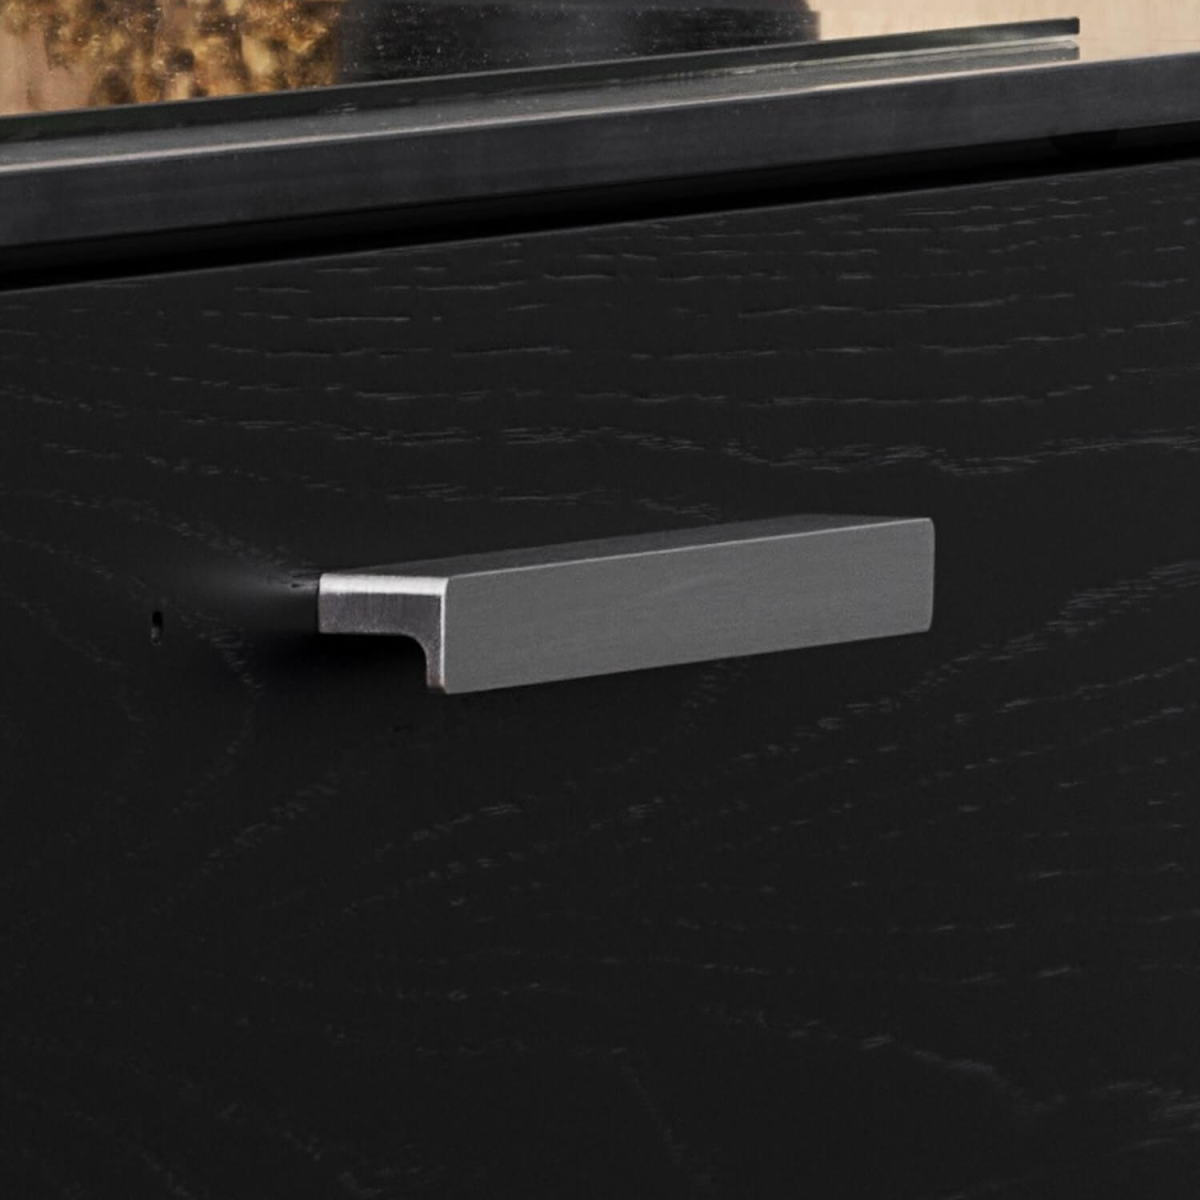 Furnipart Cabinet Handle - Brushed steel - Model Accent - 200 mm - Cabinet  handles - VillaHus